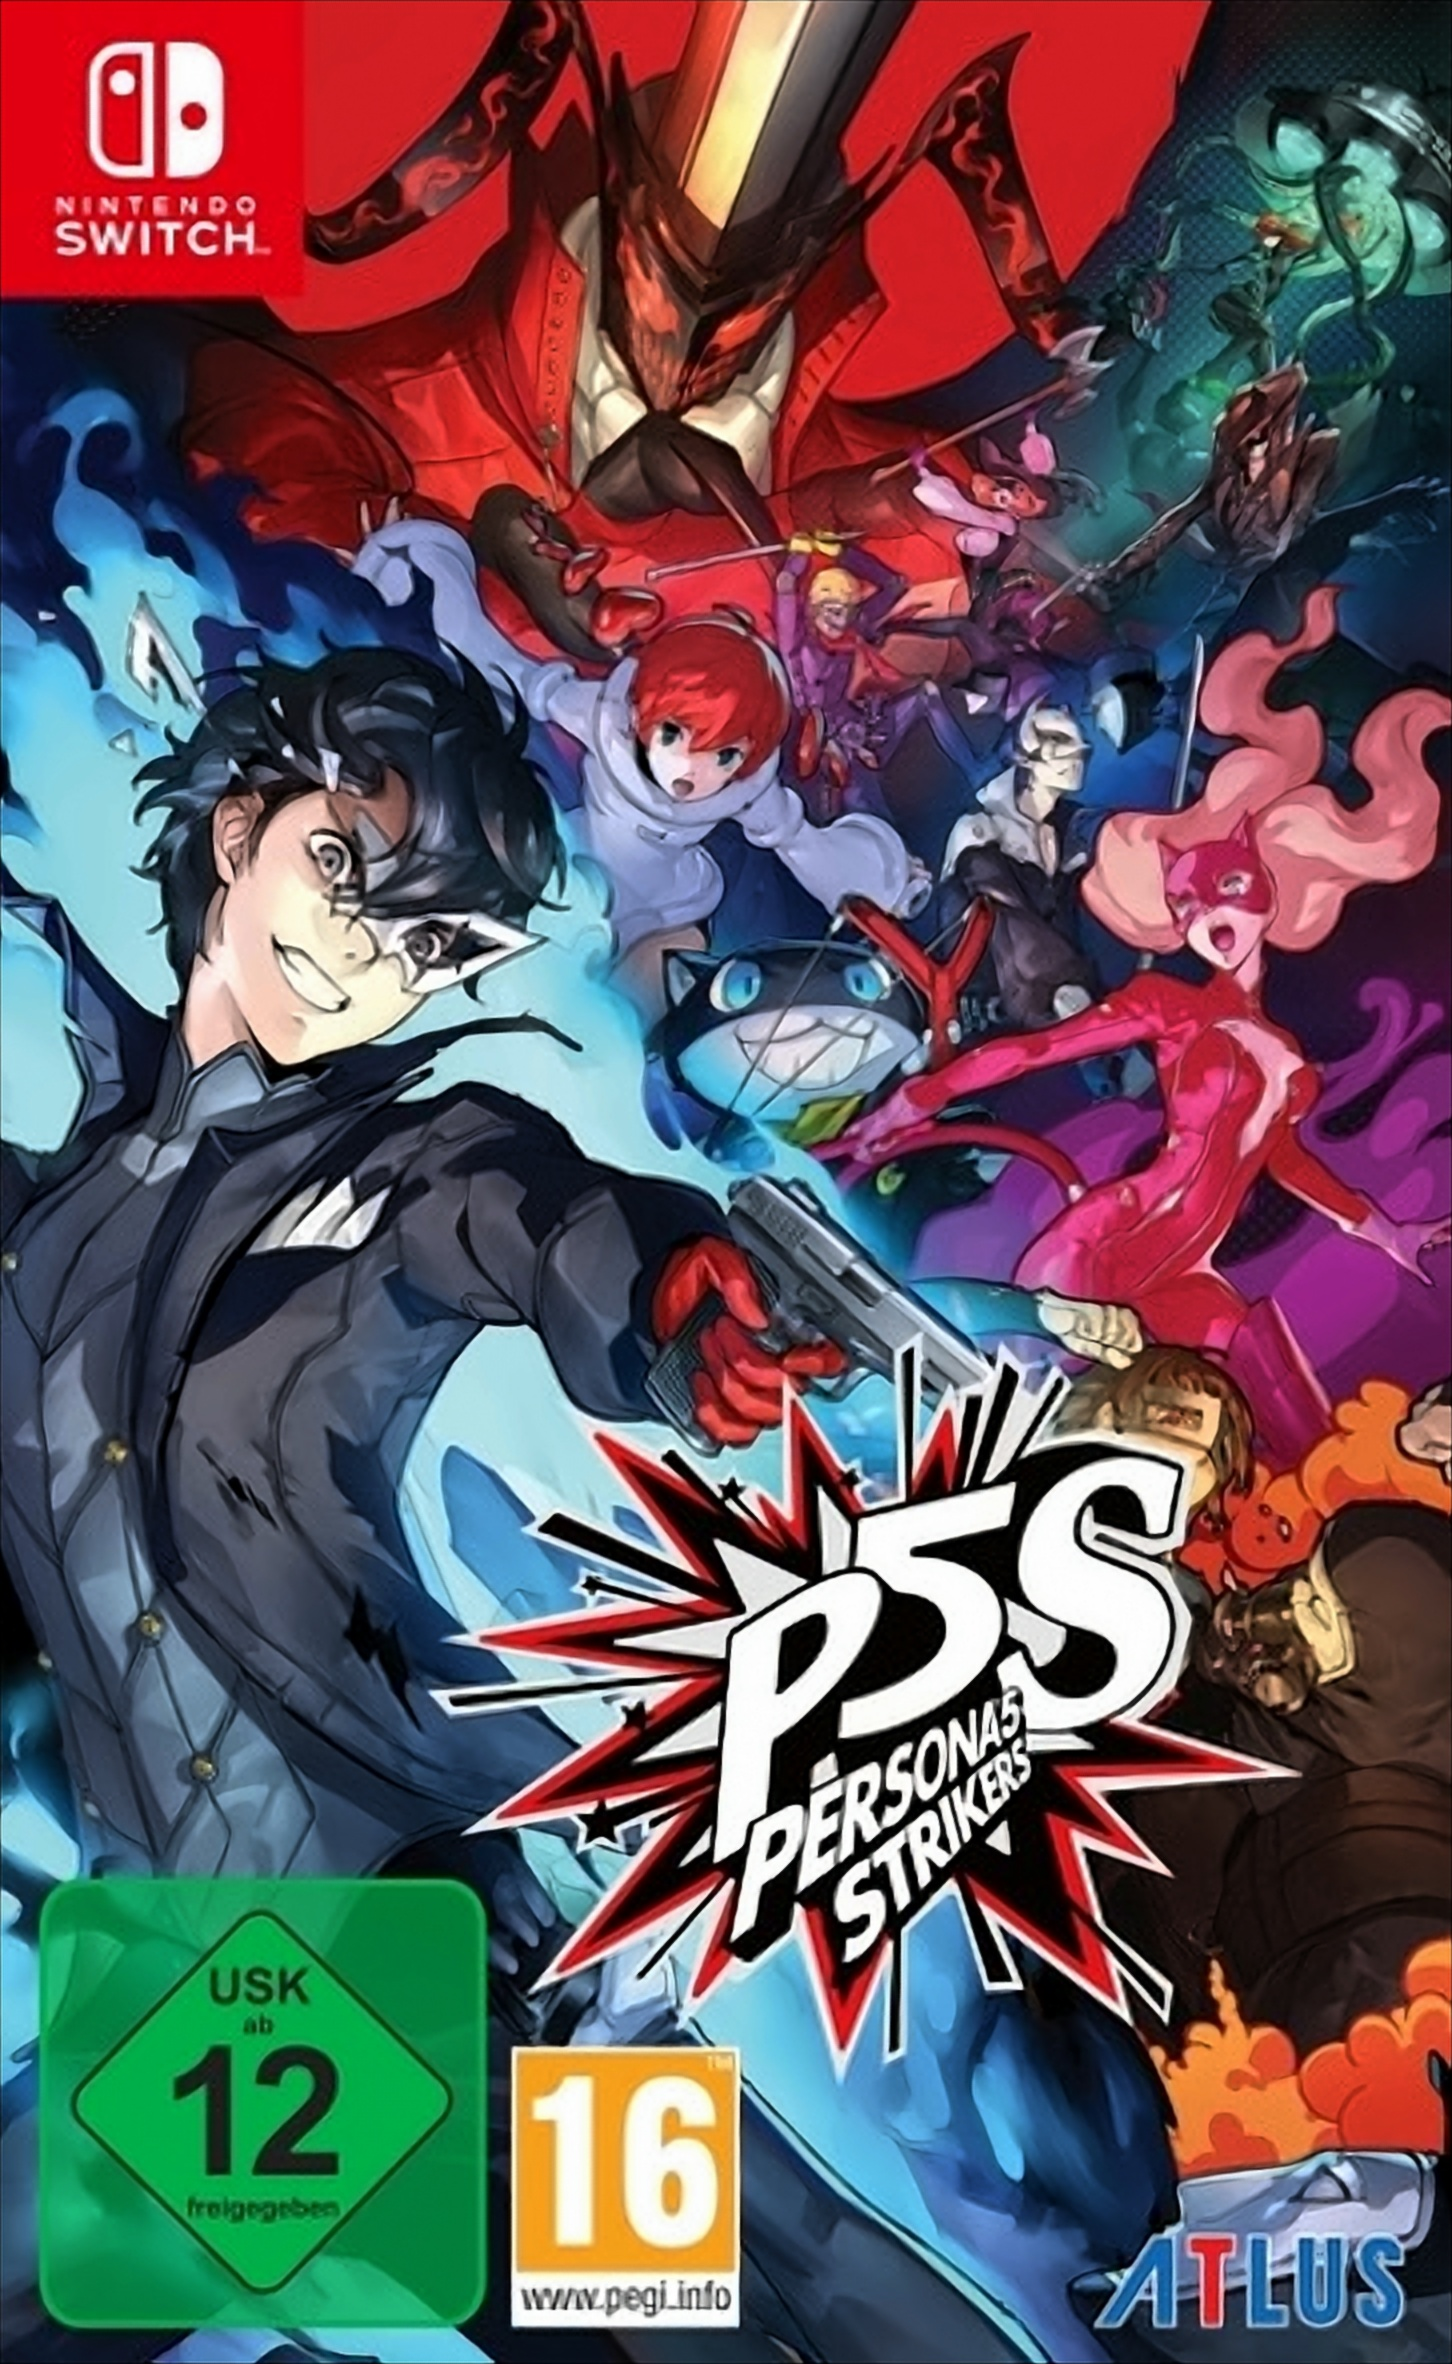 [Nintendo Edition 5 - Persona Strikers Switch] Limited